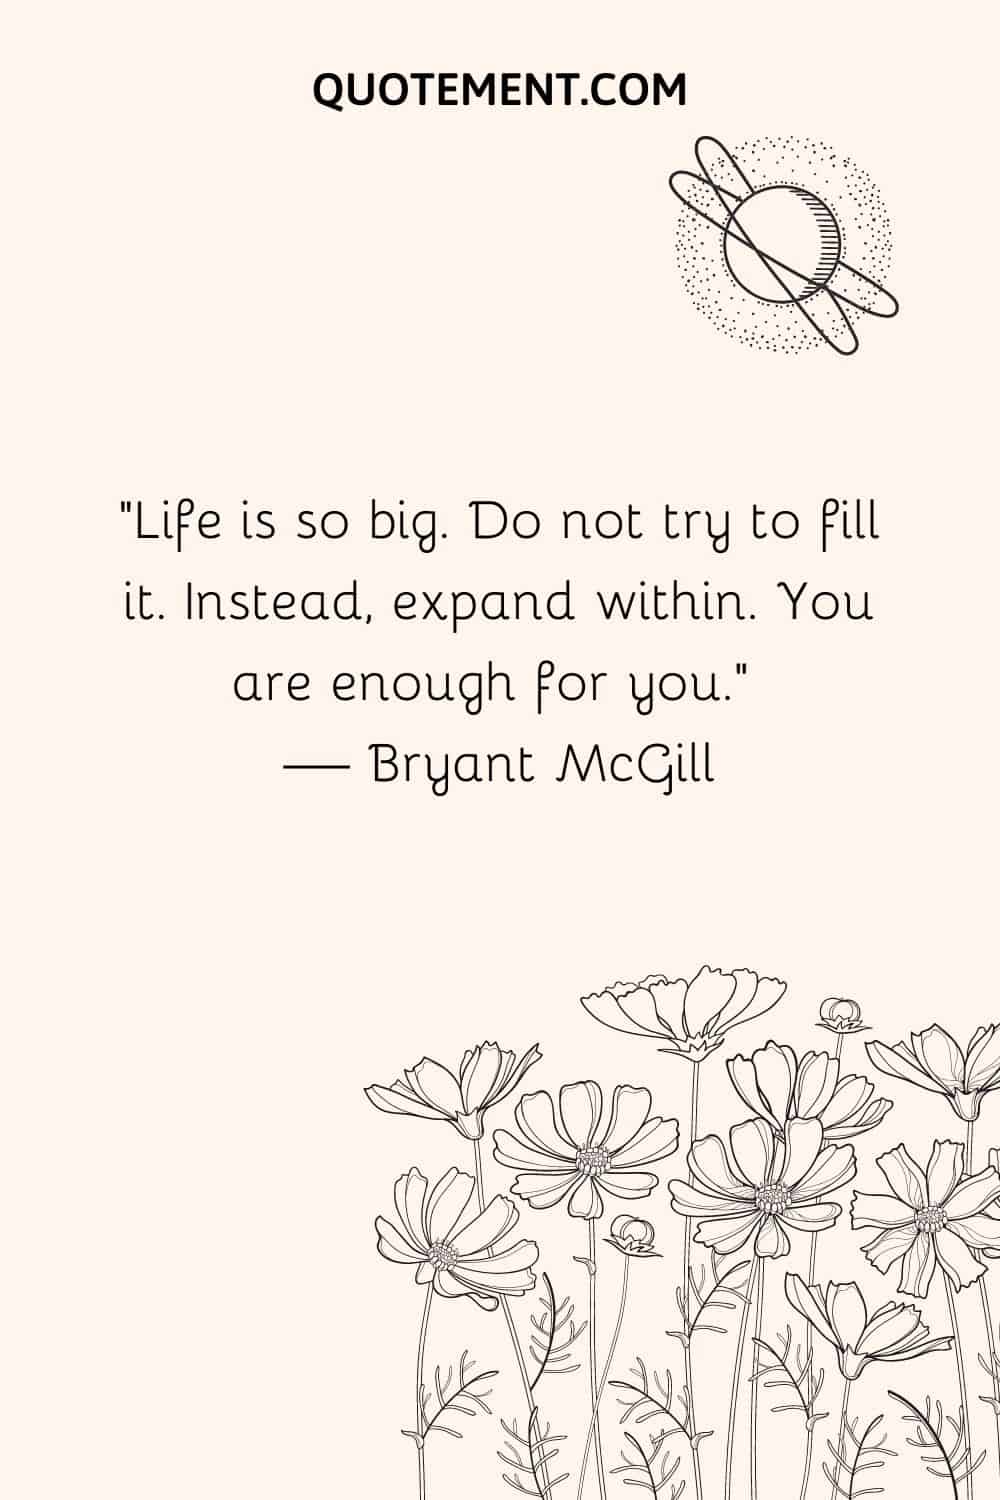 Life is so big. Do not try to fill it. Instead, expand within. You are enough for you